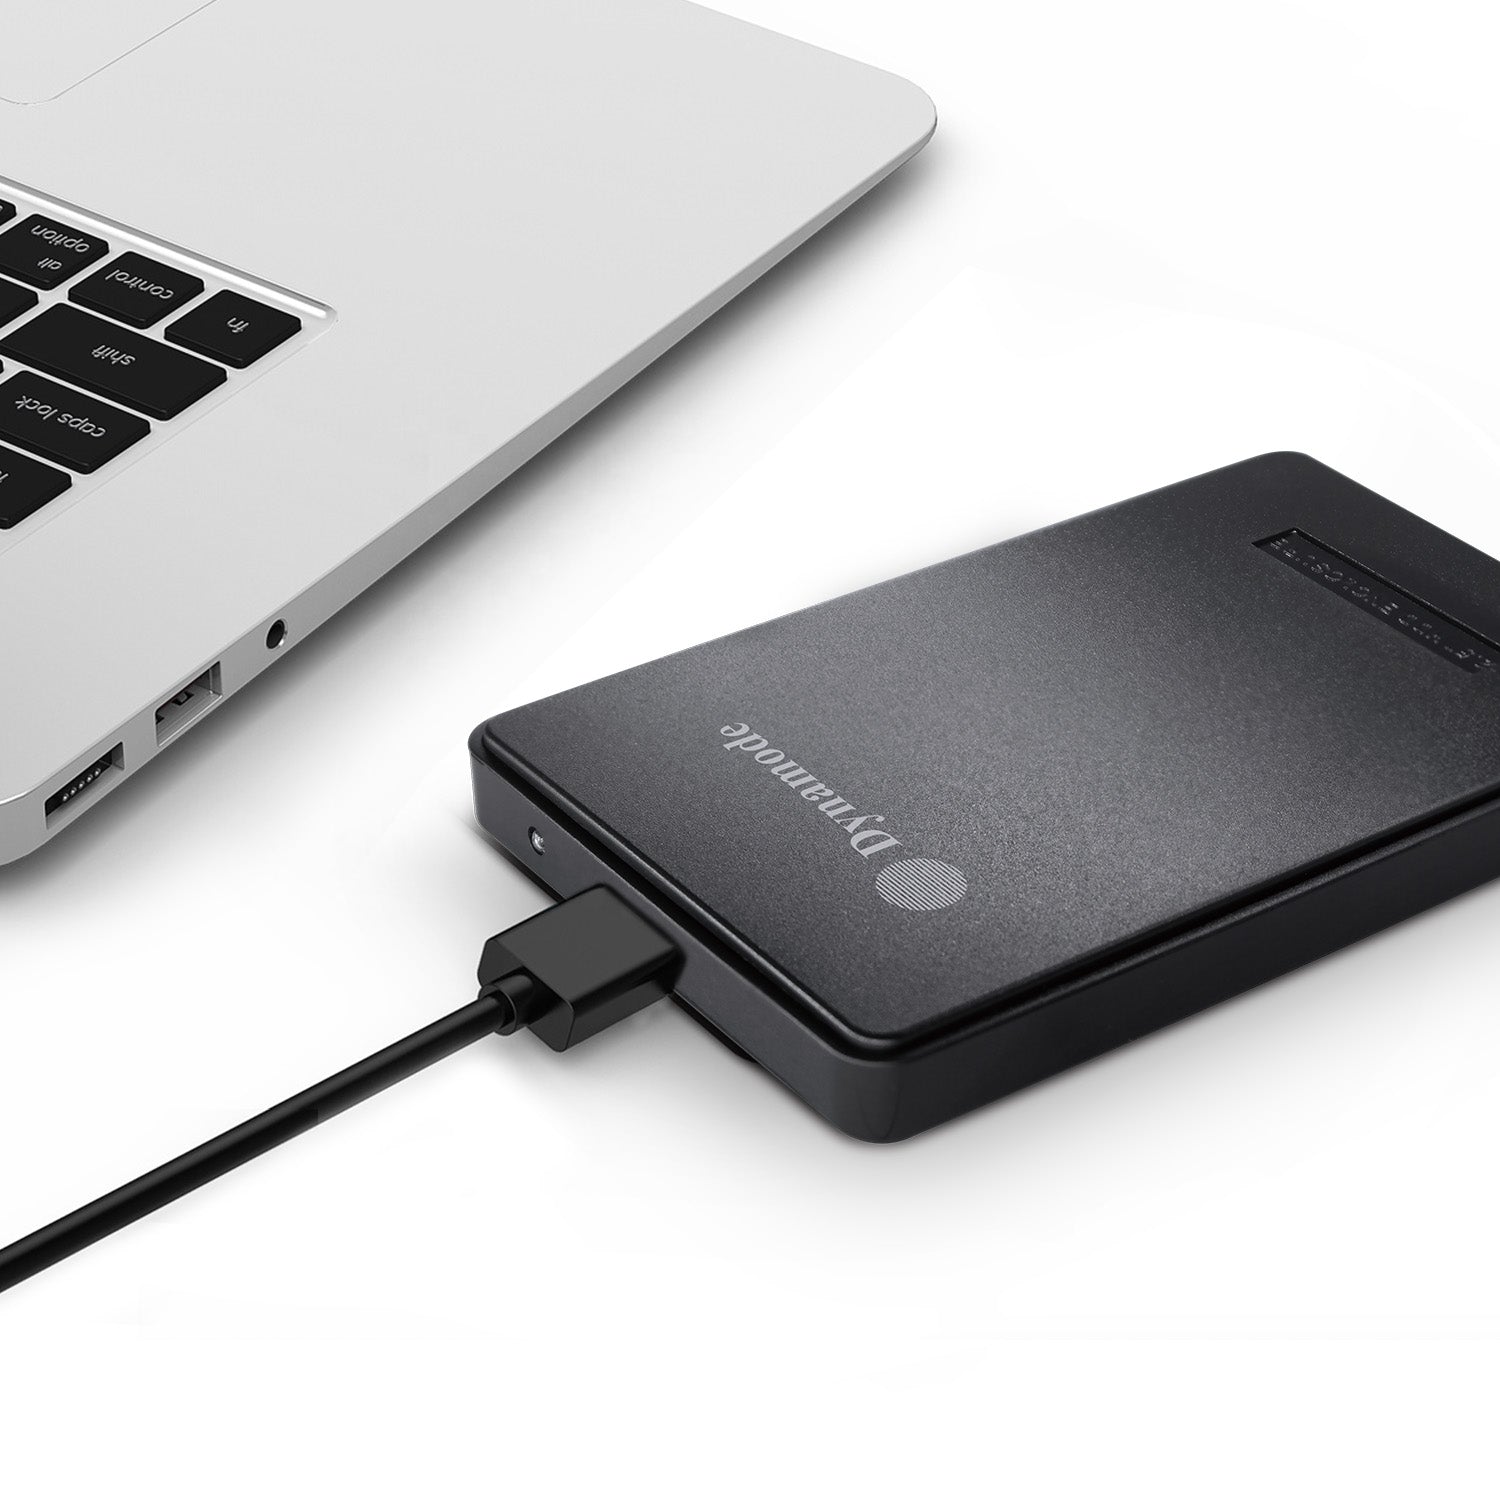 USB3.0 HDD Case for 2.5" SATA